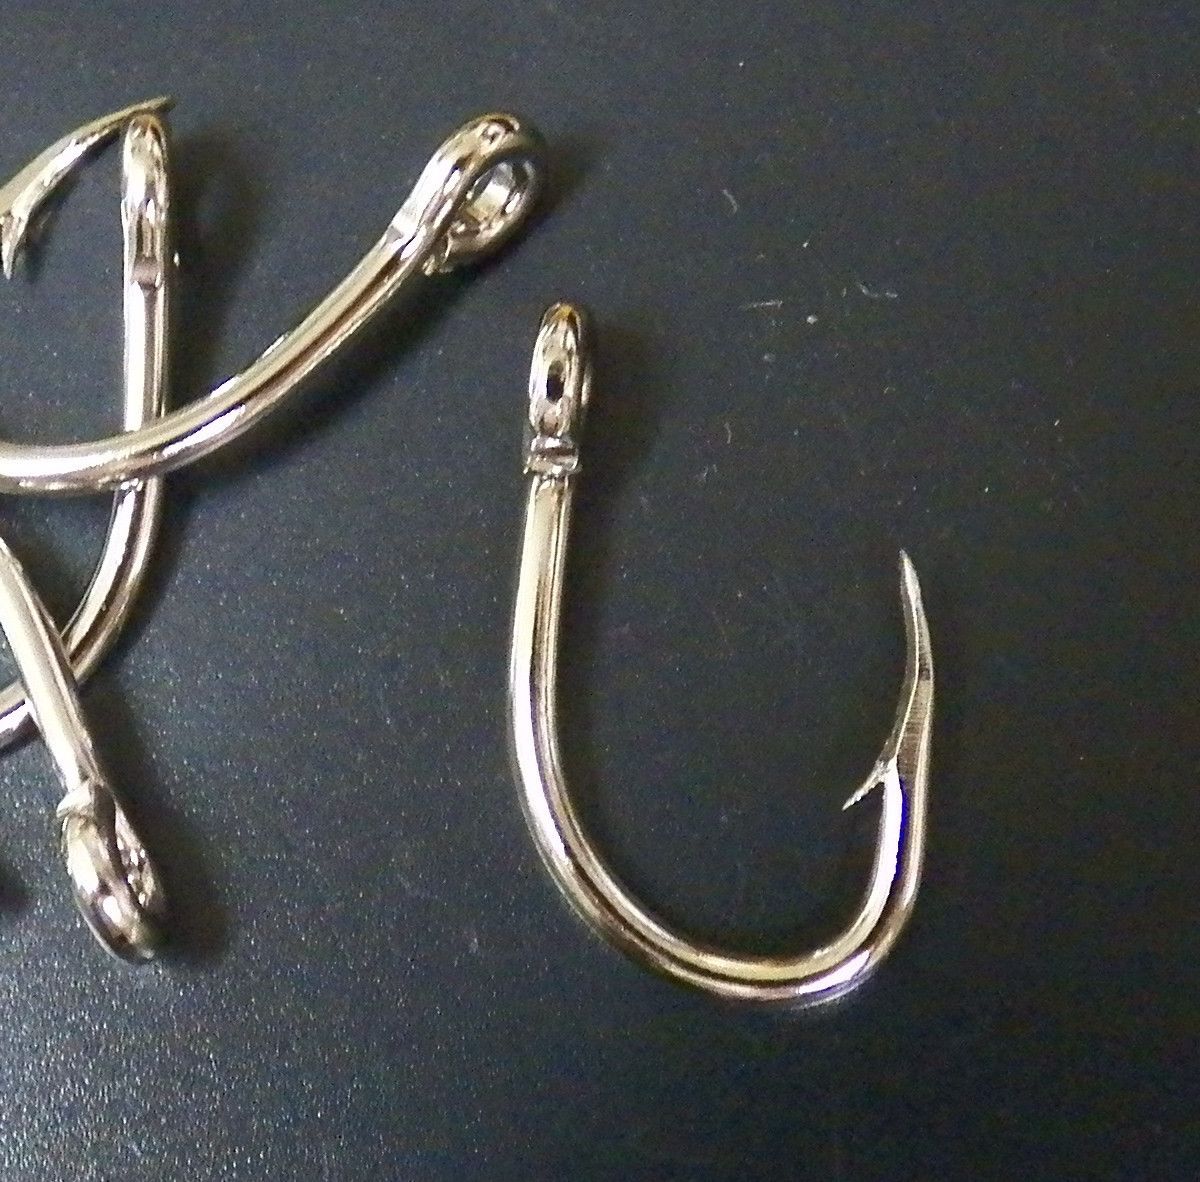 25 Live Bait Size 1 Magnum Strong Sharp Heavy Duty Fish Hook Eagle